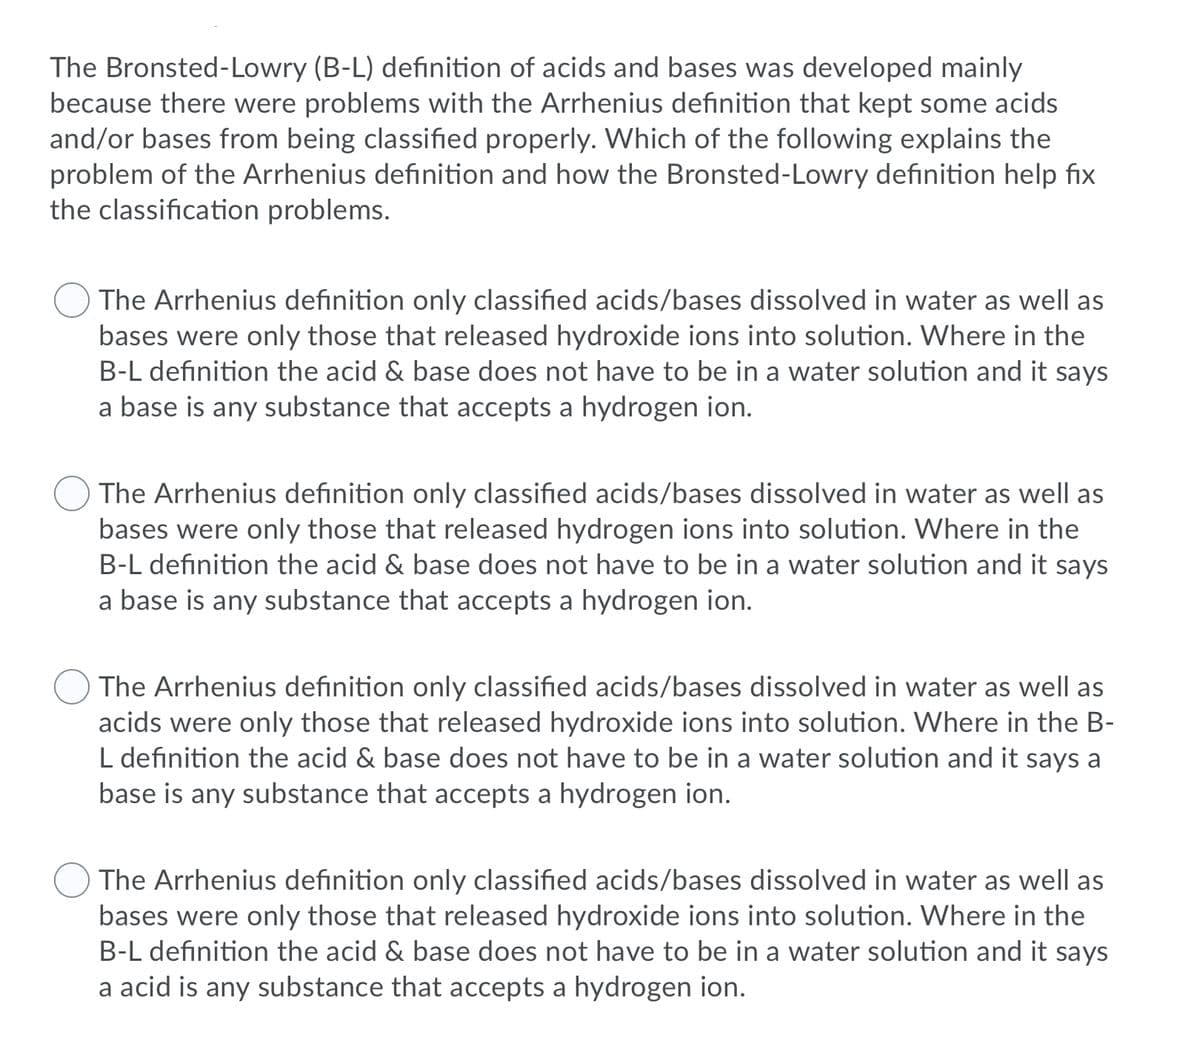 The Bronsted-Lowry (B-L) definition of acids and bases was developed mainly
because there were problems with the Arrhenius definition that kept some acids
and/or bases from being classified properly. Which of the following explains the
problem of the Arrhenius definition and how the Bronsted-Lowry definition help fix
the classification problems.
The Arrhenius definition only classified acids/bases dissolved in water as well as
bases were only those that released hydroxide ions into solution. Where in the
B-L definition the acid & base does not have to be in a water solution and it says
a base is any substance that accepts a hydrogen ion.
The Arrhenius definition only classified acids/bases dissolved in water as well as
bases were only those that released hydrogen ions into solution. Where in the
B-L definition the acid & base does not have to be in a water solution and it says
a base is any substance that accepts a hydrogen ion.
The Arrhenius definition only classified acids/bases dissolved in water as well as
acids were only those that released hydroxide ions into solution. Where in the B-
L definition the acid & base does not have to be in a water solution and it says a
base is any substance that accepts a hydrogen ion.
The Arrhenius definition only classified acids/bases dissolved in water as well as
bases were only those that released hydroxide ions into solution. Where in the
B-L definition the acid & base does not have to be in a water solution and it says
a acid is any substance that accepts a hydrogen ion.
